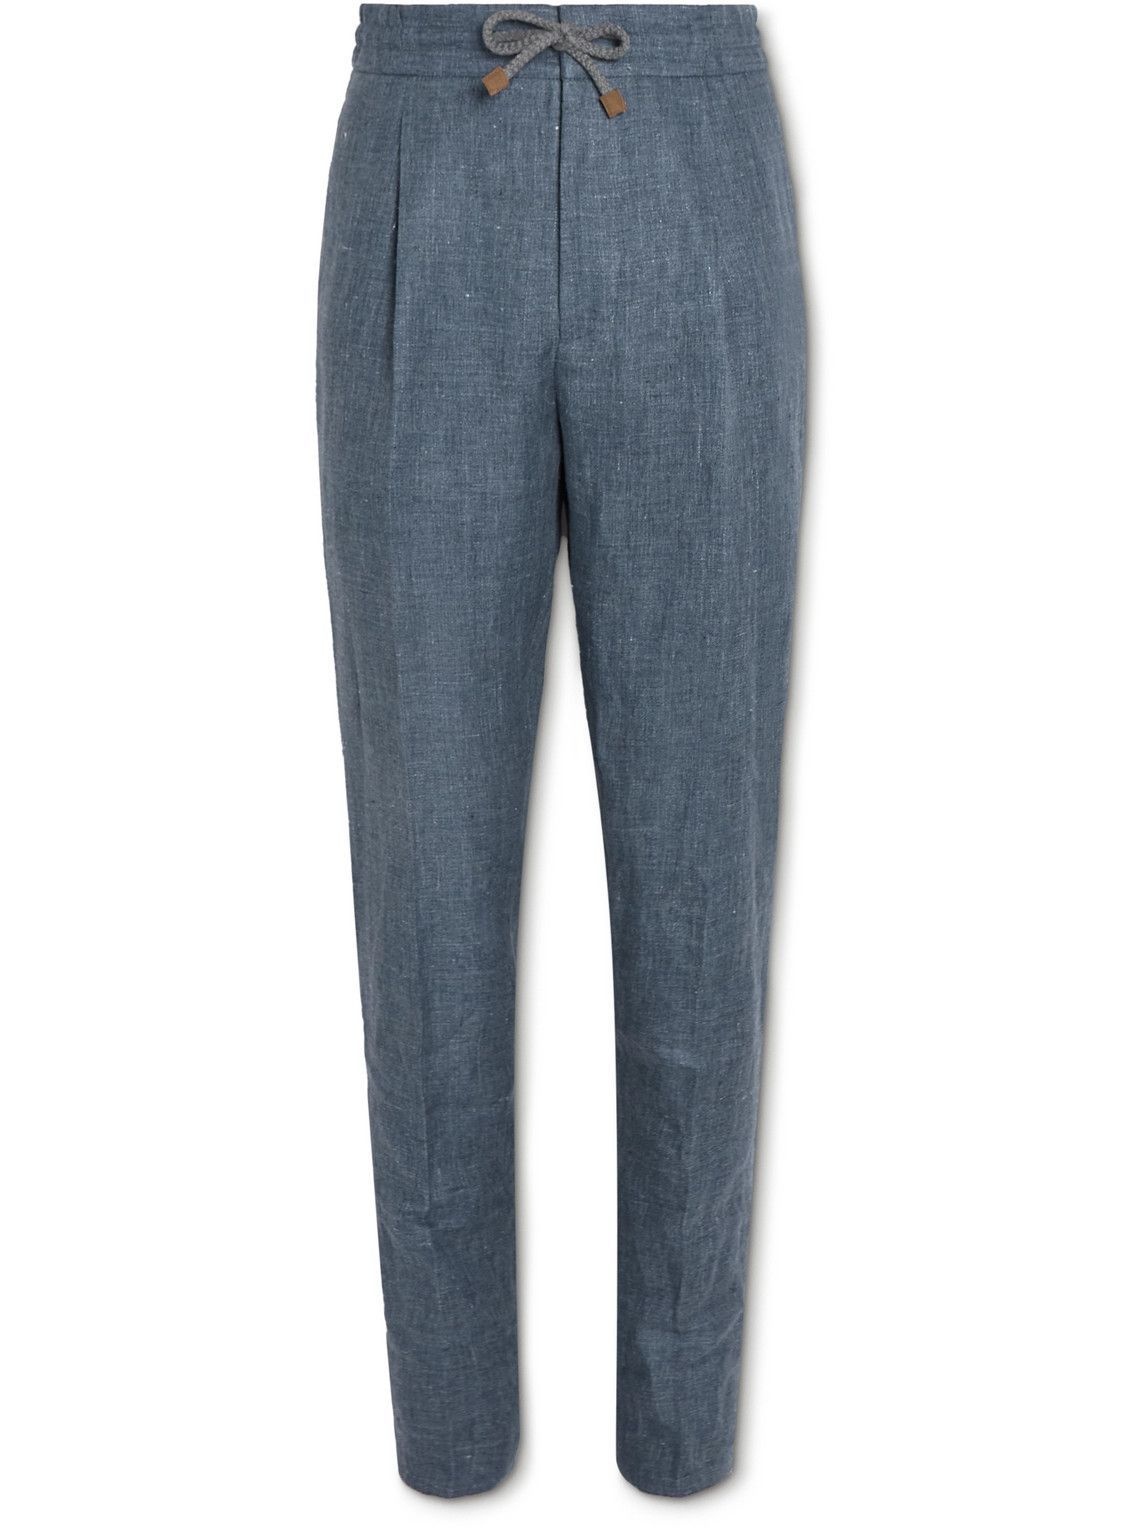 Brunello Cucinelli - Tapered Pleated Linen Drawstring Trousers - Blue ...